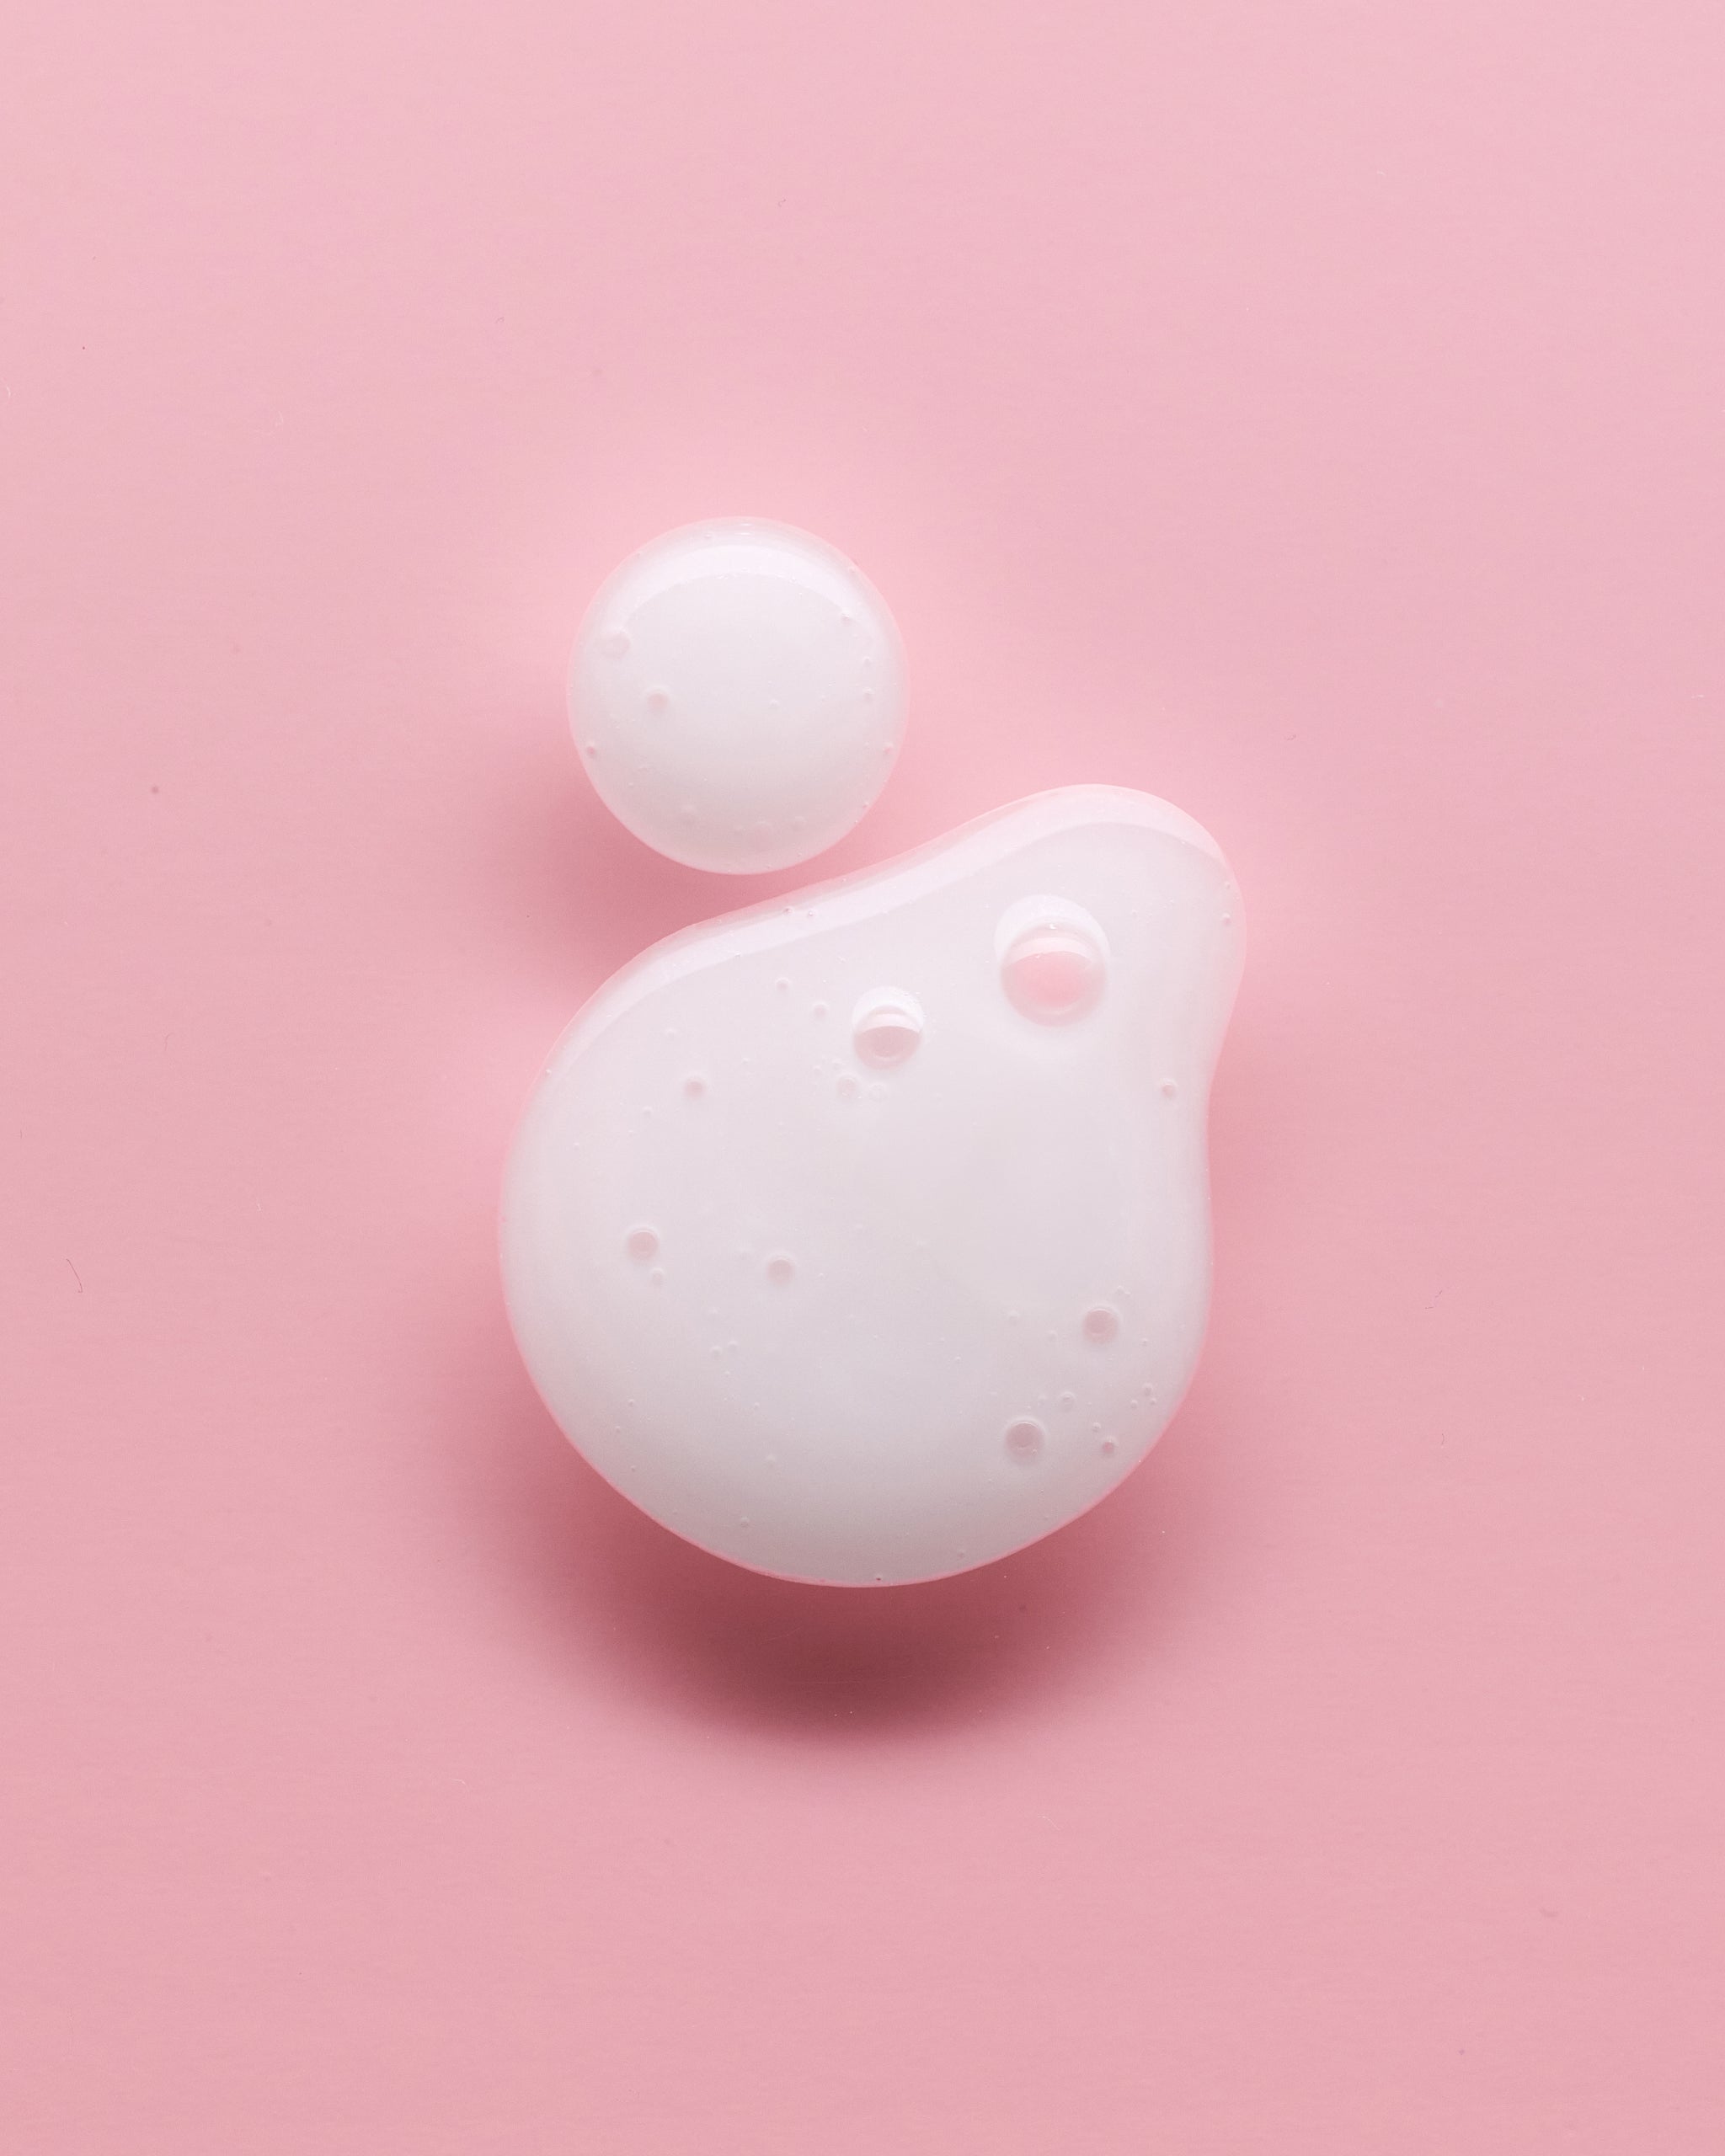 Drops of Corrective Peptide Serum on pink background